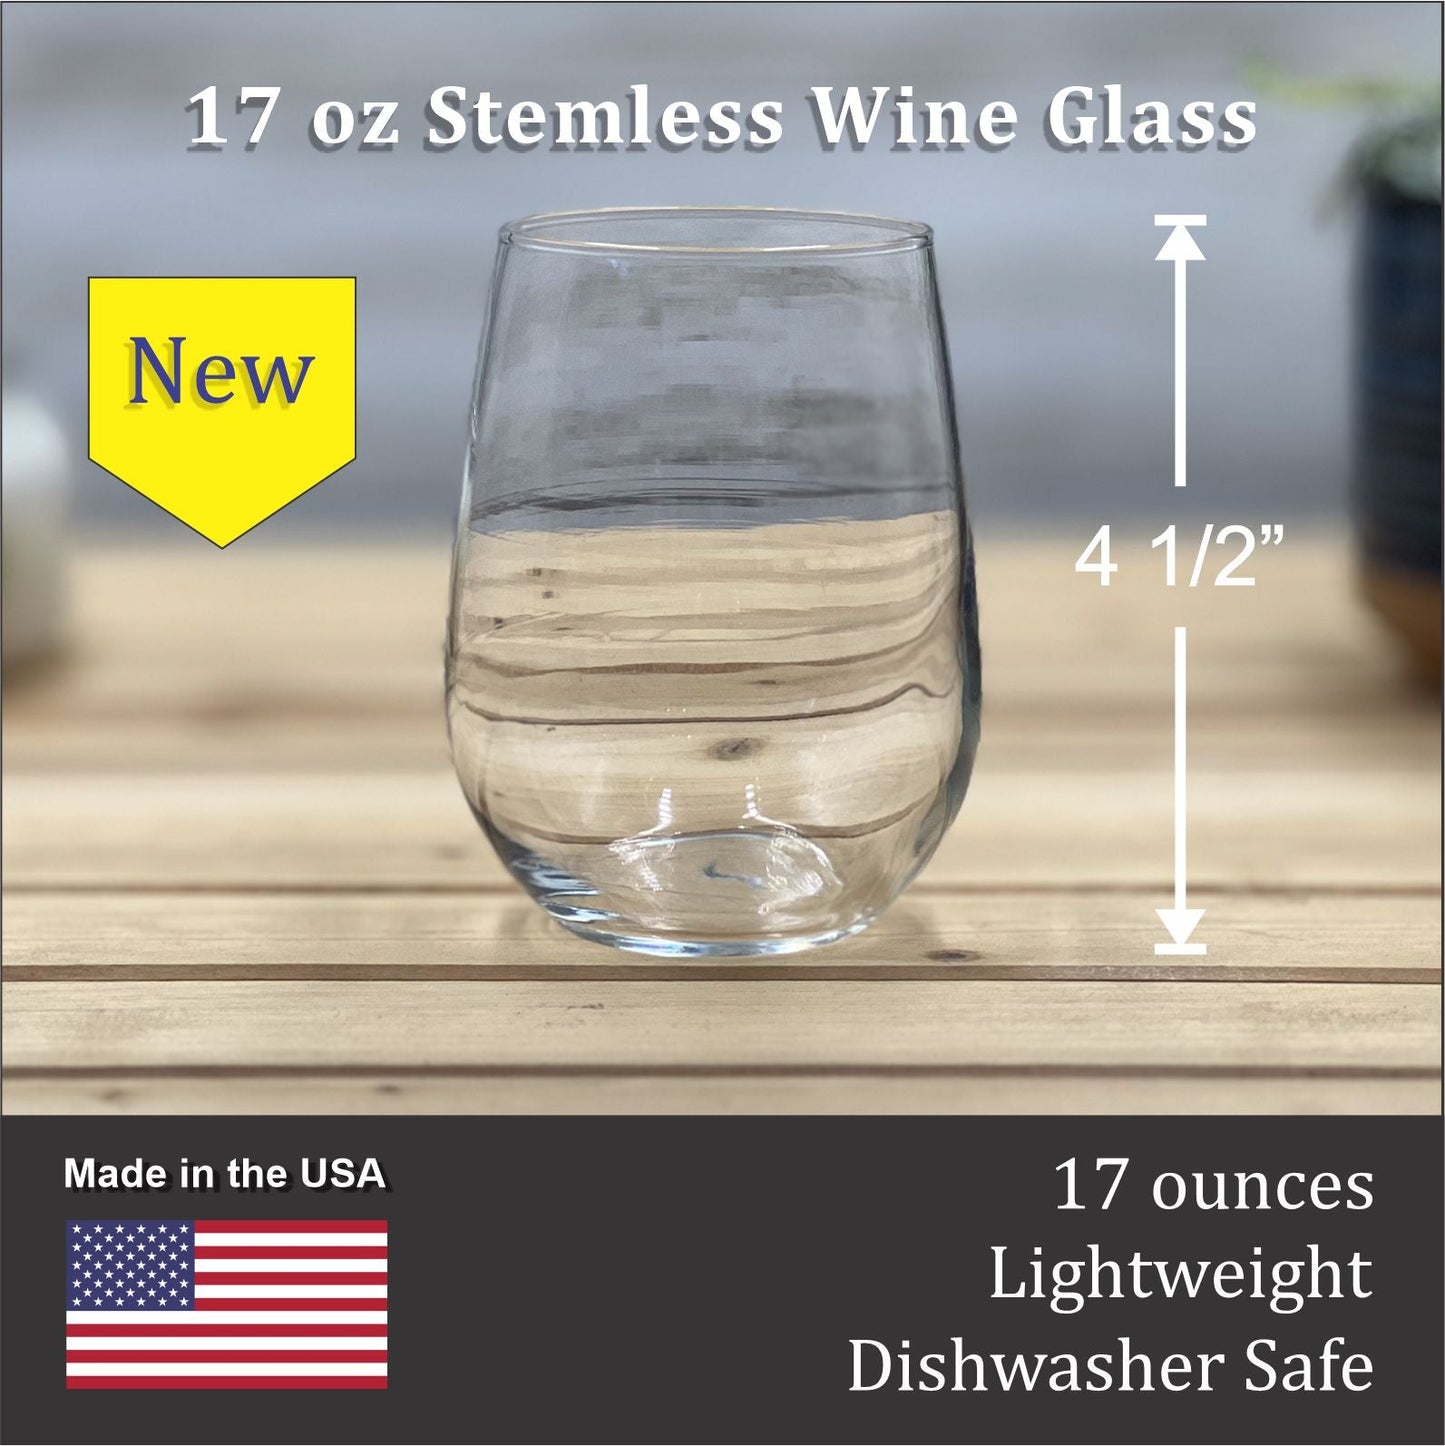 Moose- Etched 17 oz Stemless Wine Glass